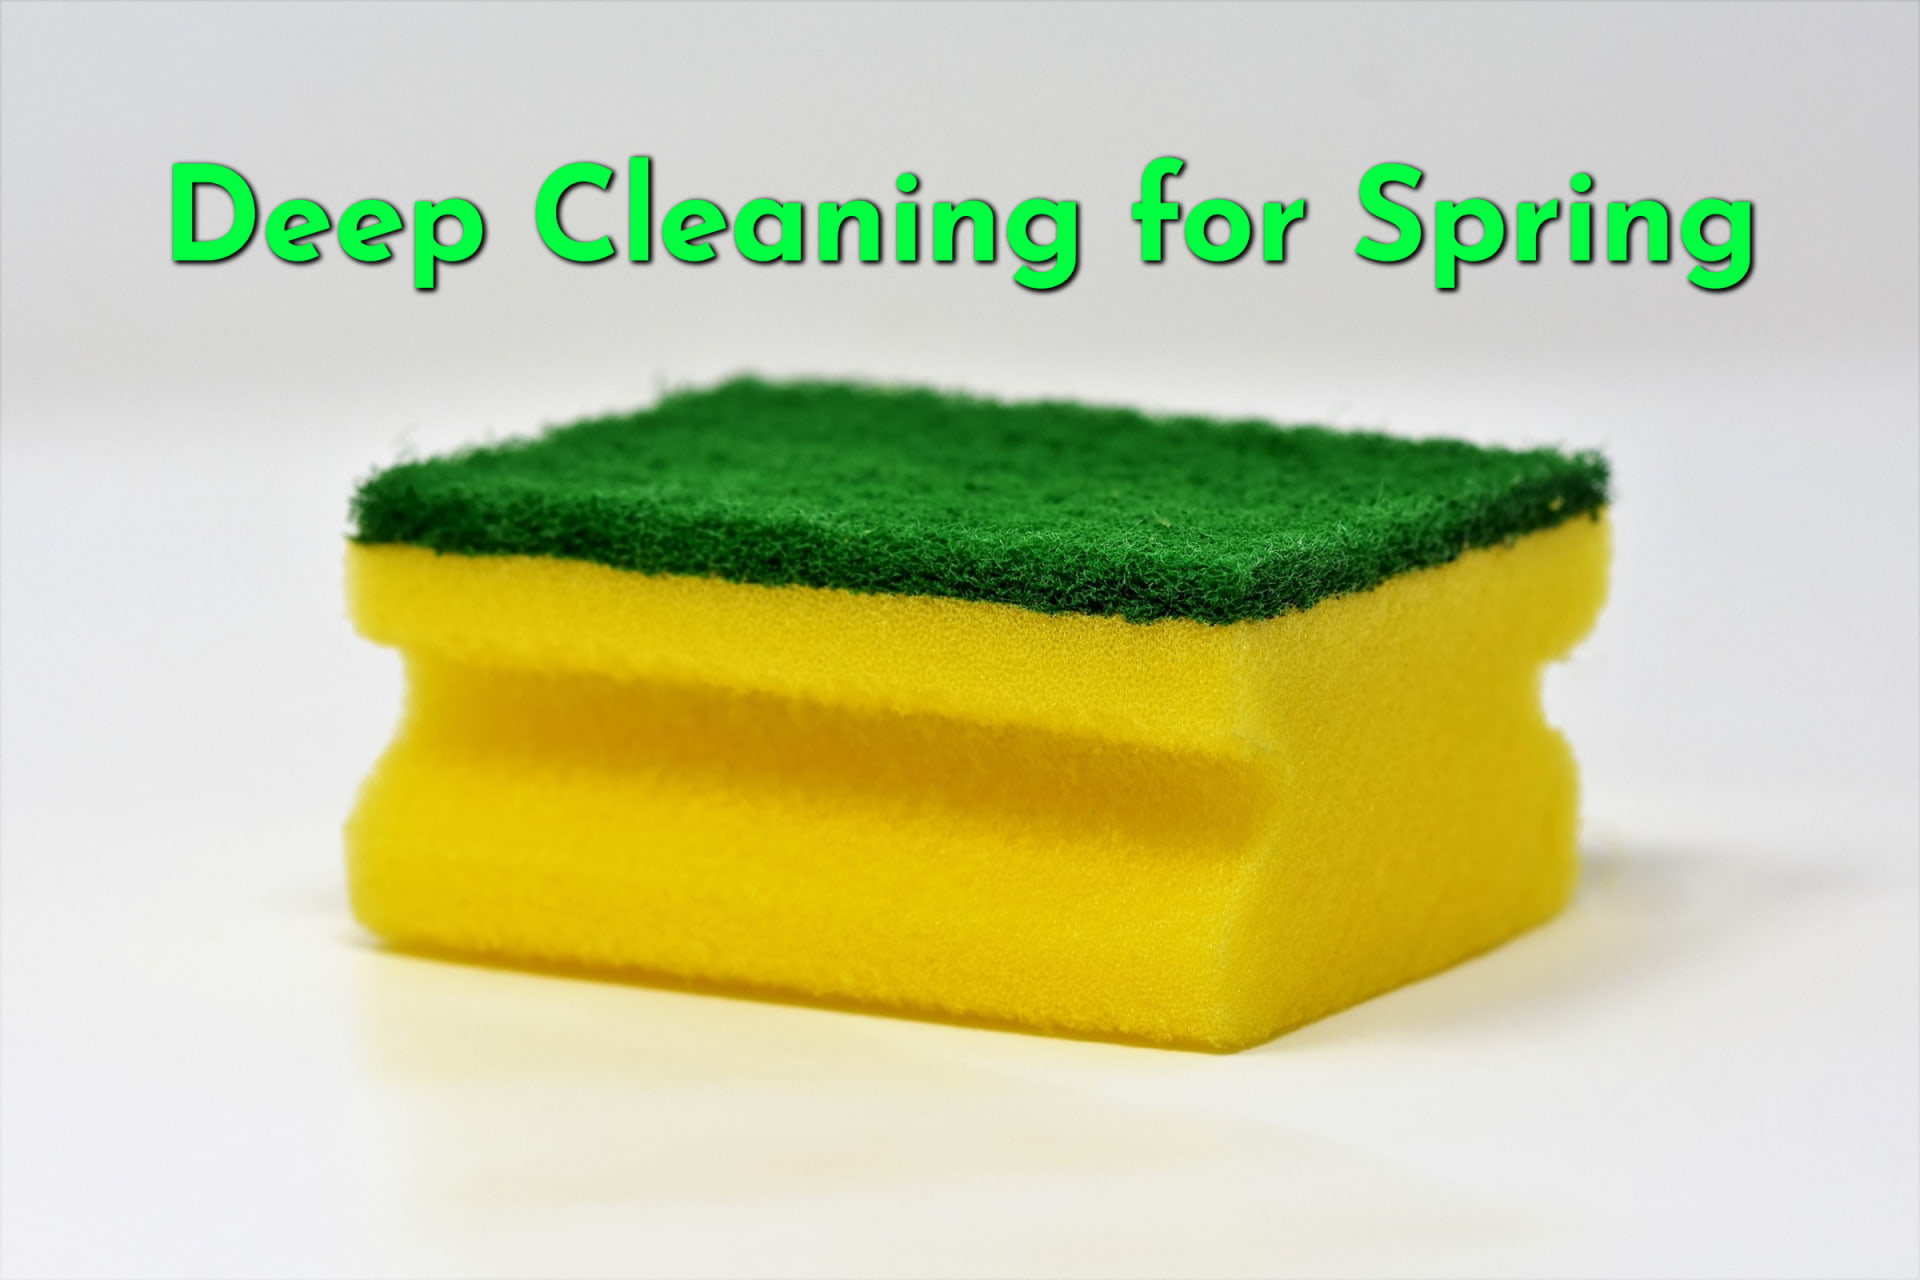 A scrubber sponge for deep cleaning